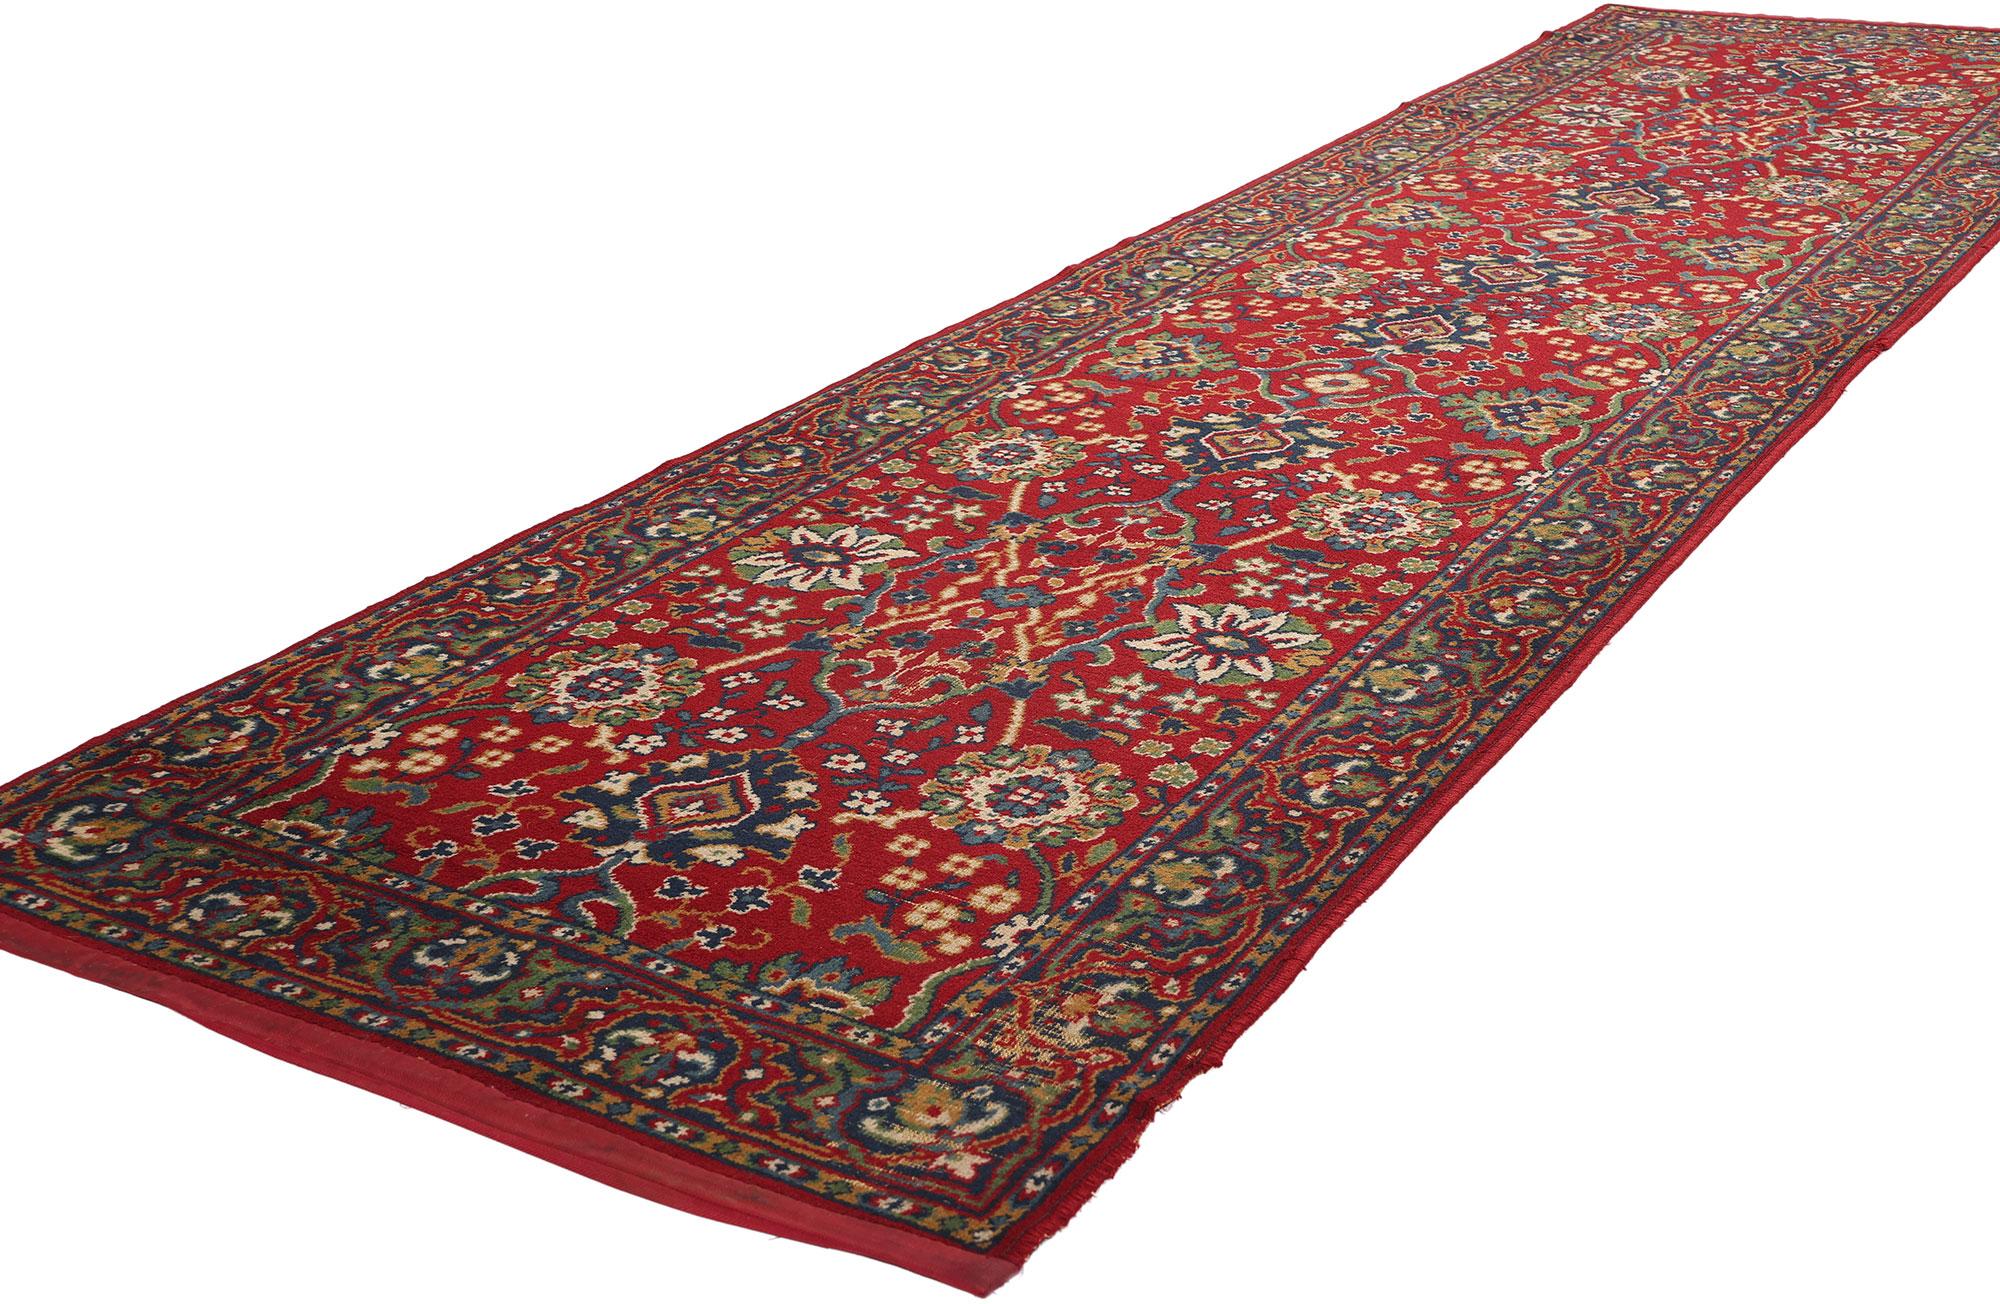 73163 Antique Machine-Made European Persian Floral Rug Runner, 02'11 x 11'06. Machine-made European carpet runners from the 1920s were typically woven using mechanized looms rather than being hand-woven. During this period, advancements in